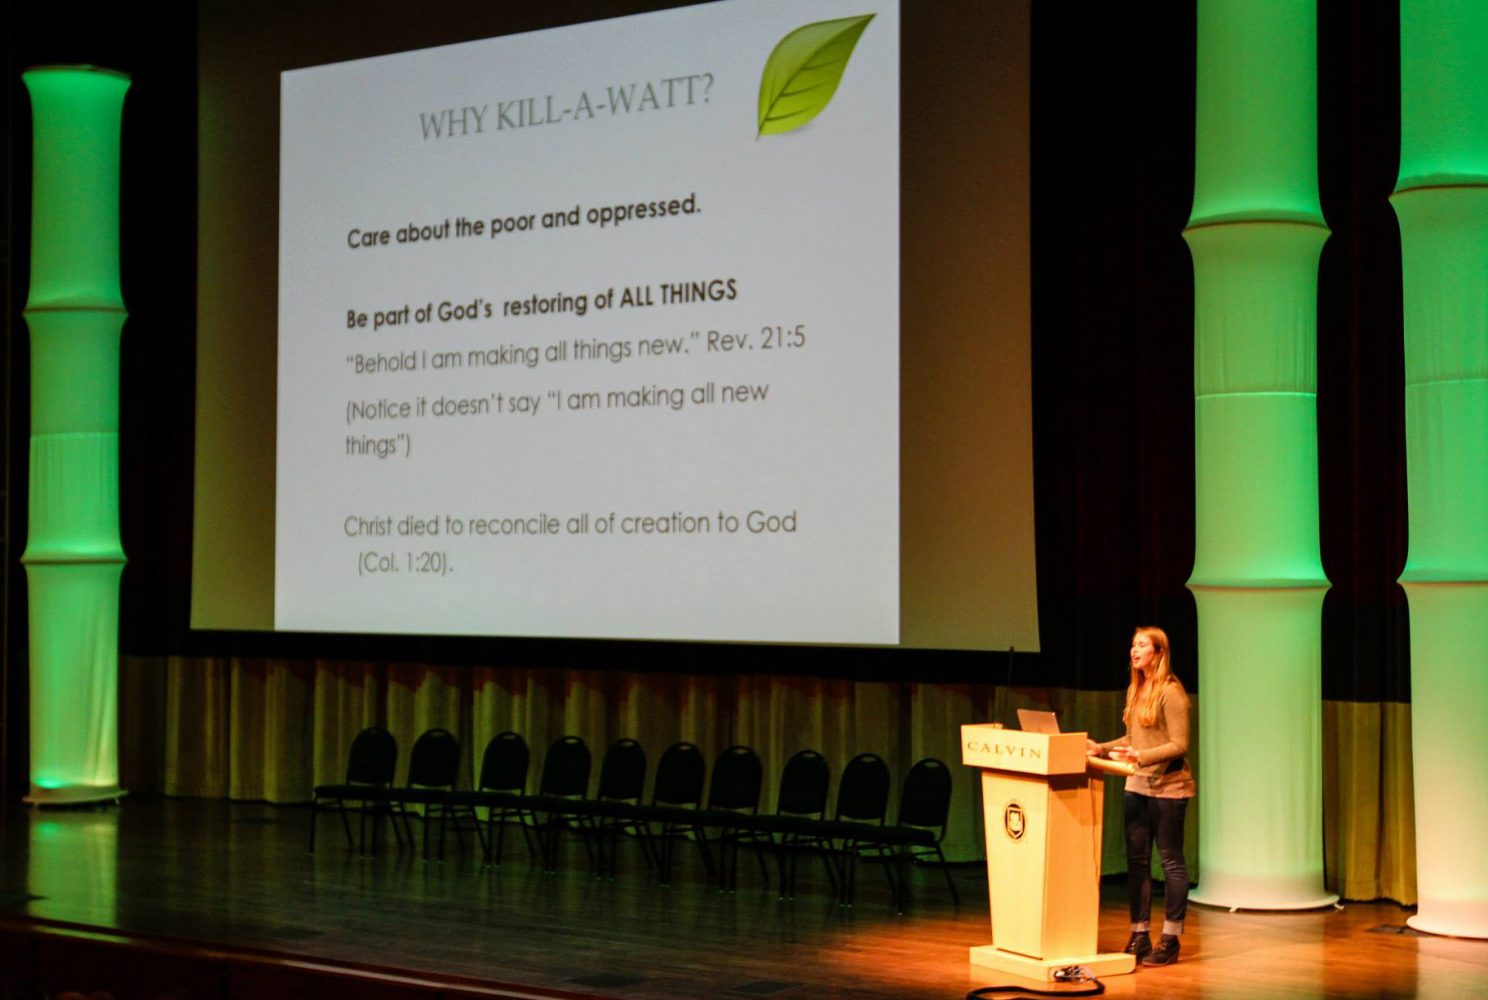 Sustainability+Coordinator+Emily+Cole+speaks+during+the+Kill-a-Watt+kick-off+event.+Photo+by+Rick+Treur.